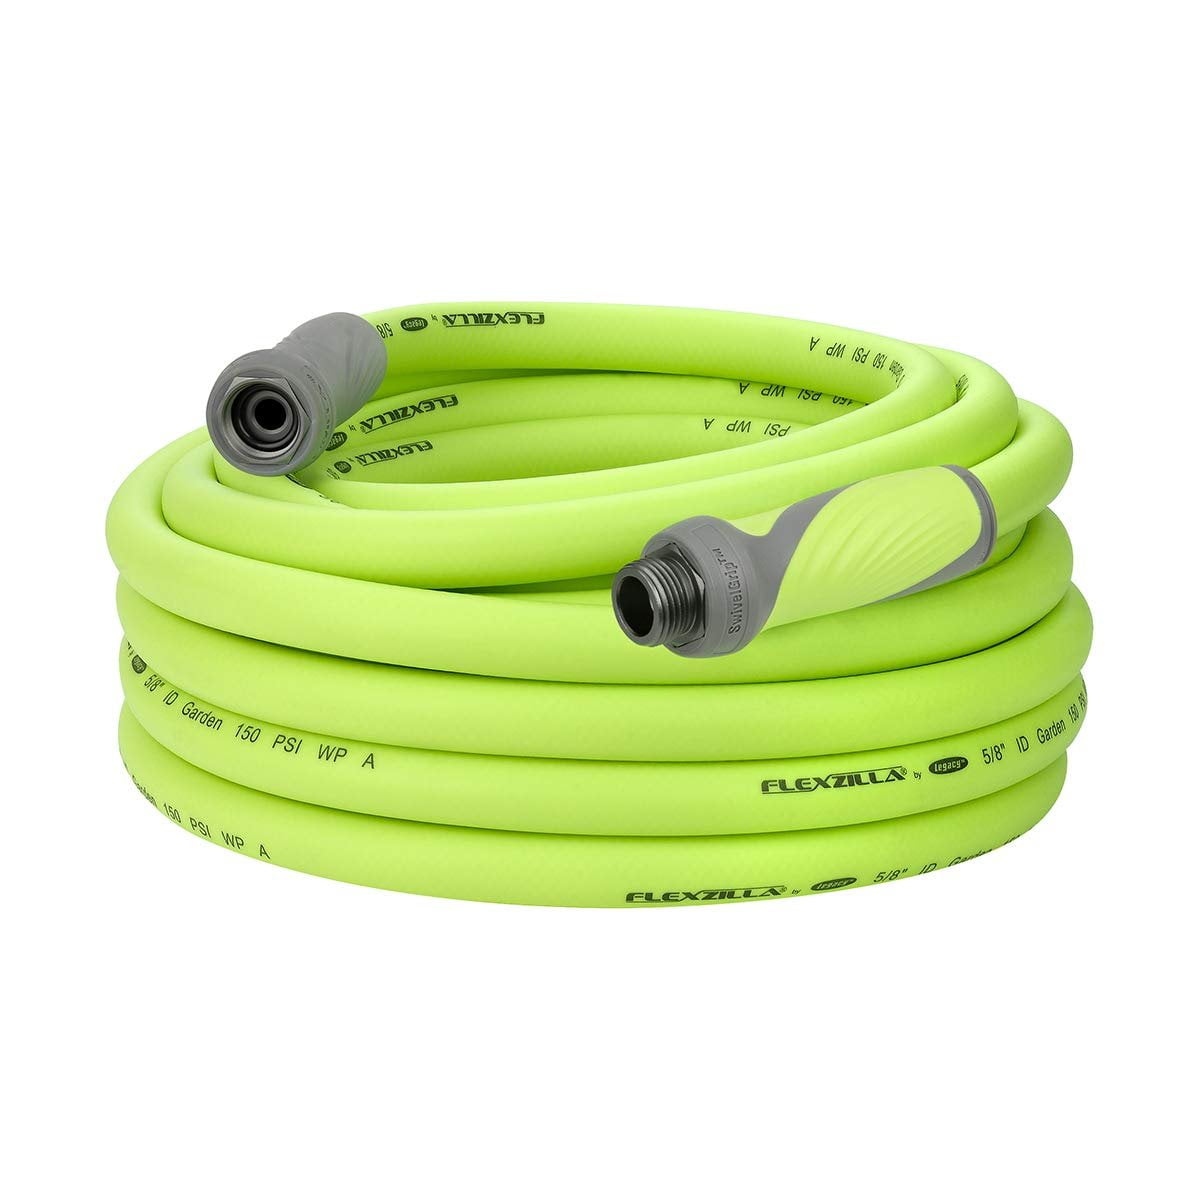 Drinking Water Safe Garden Hose with Extreme All-Weather Details about   FlexzillaA SwivelGrip 